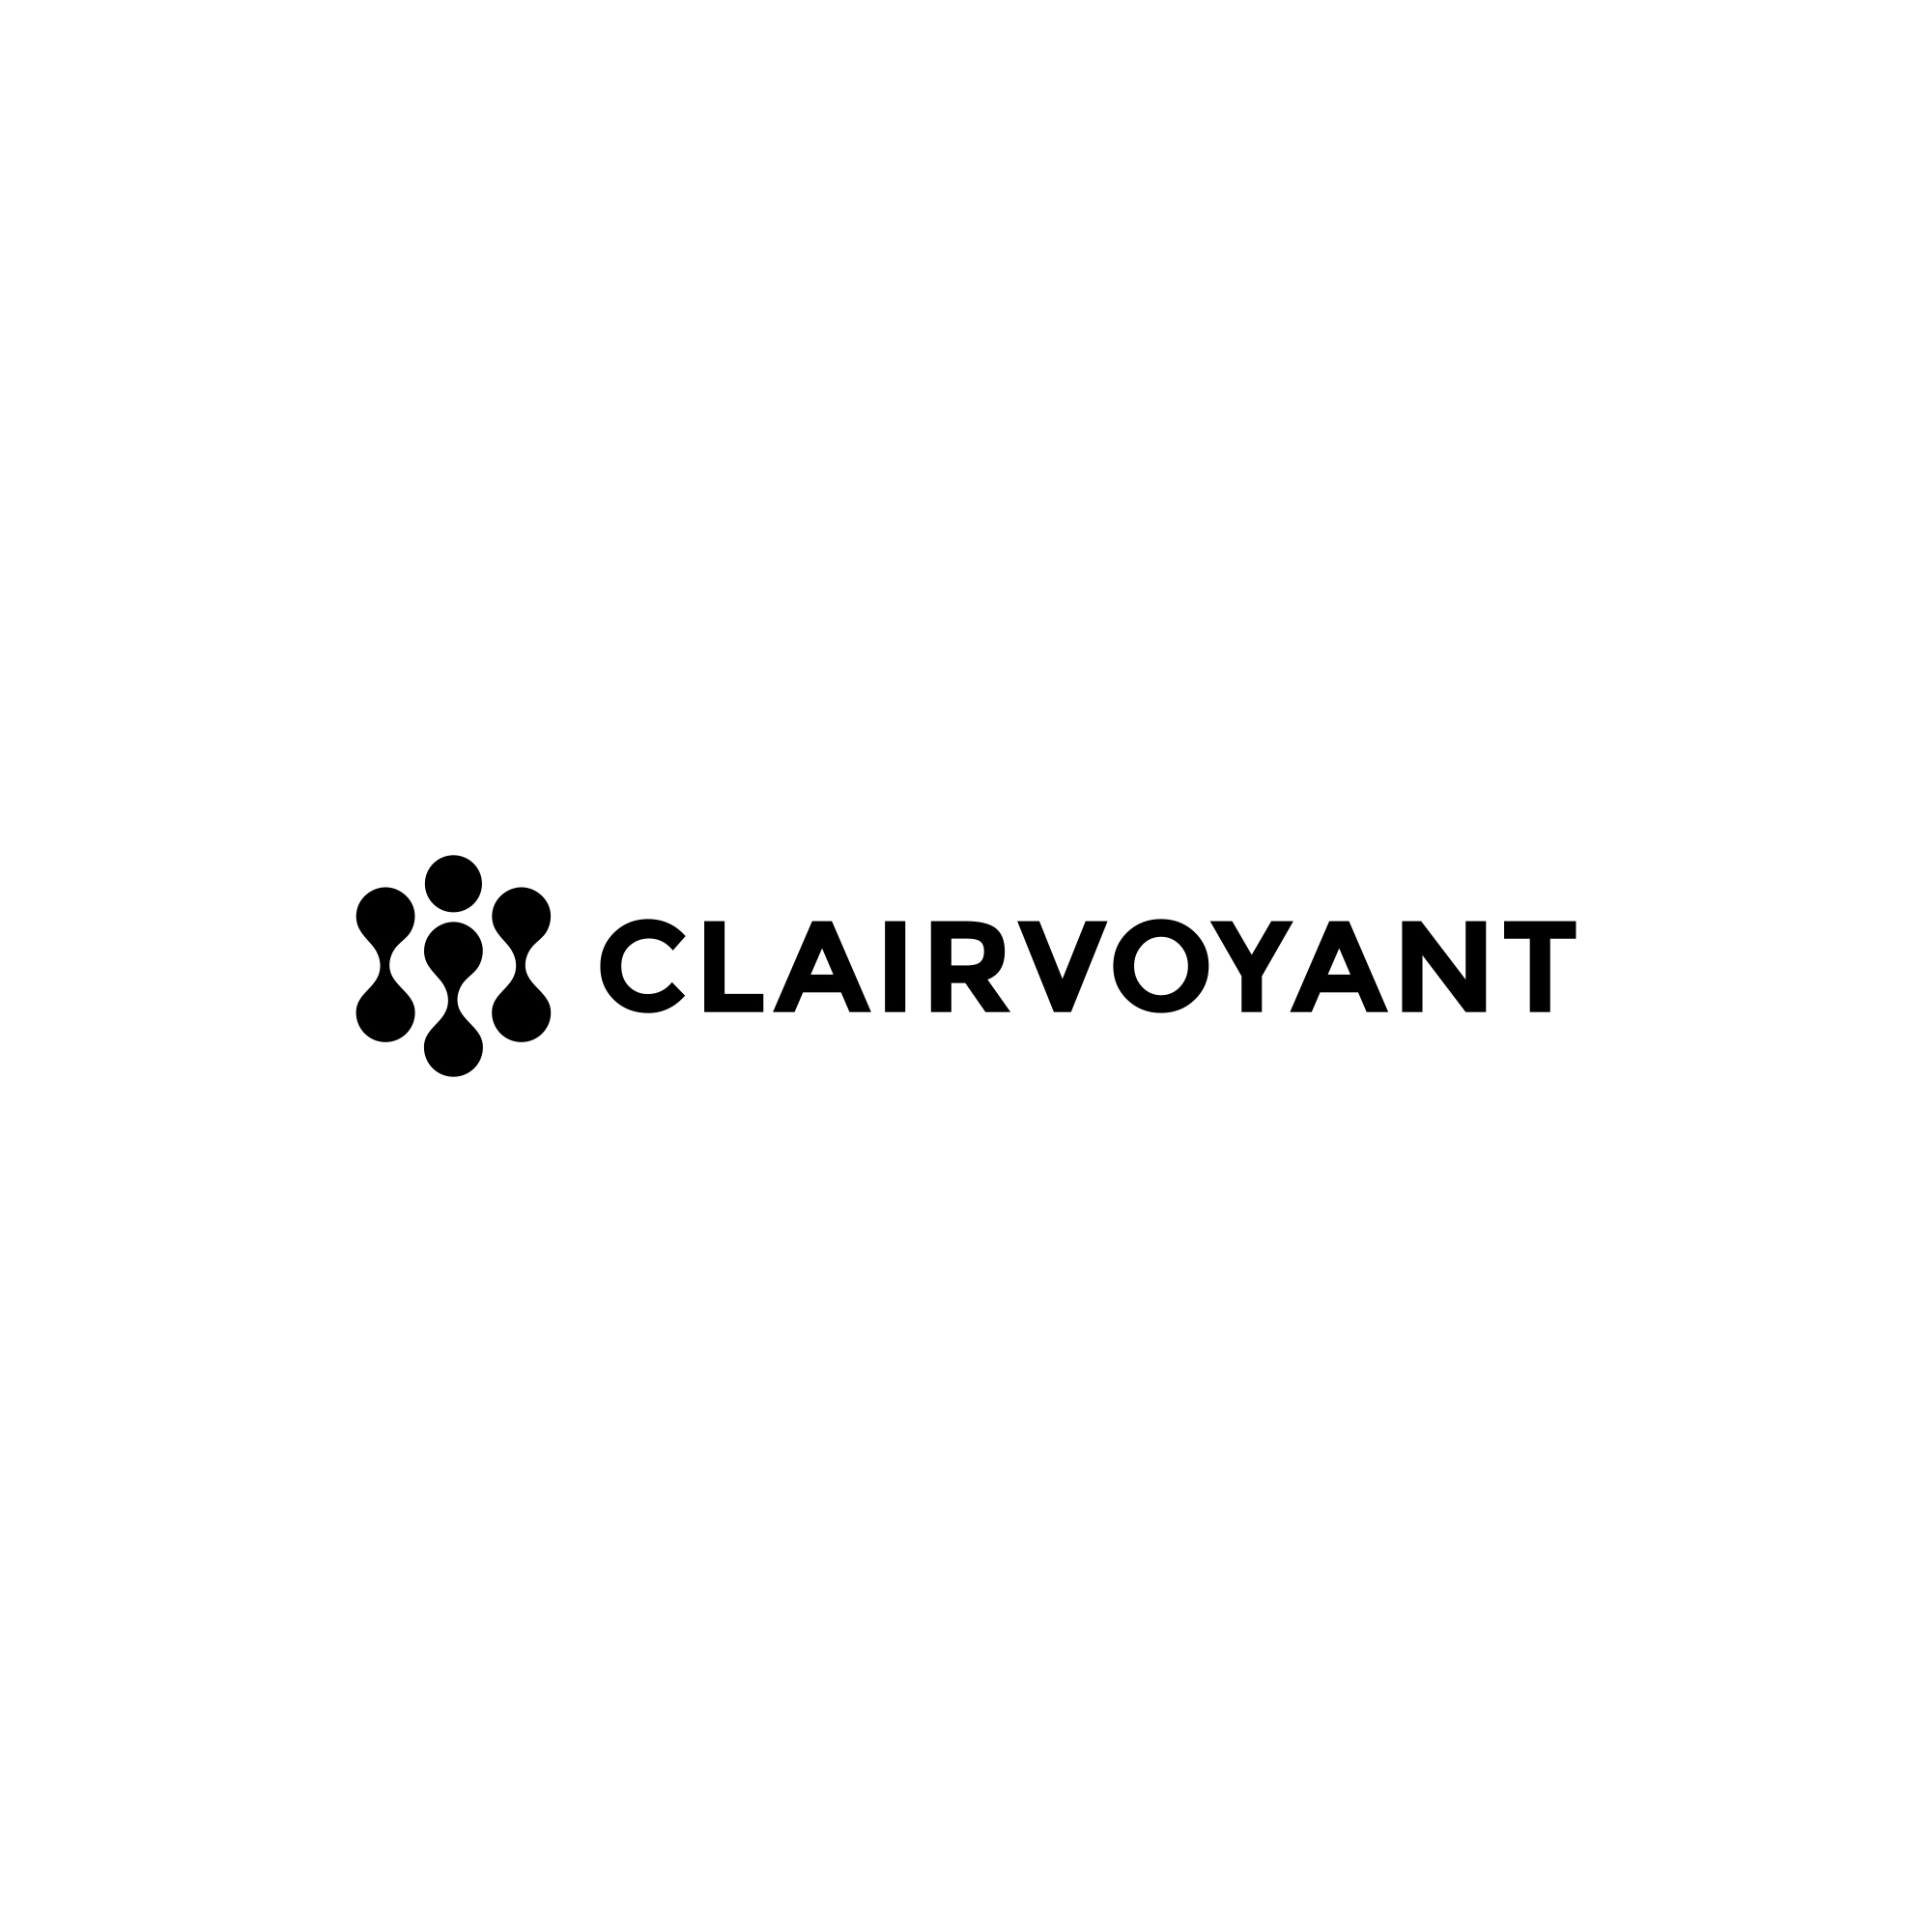 Clairvoyant Therapeutics, Wednesday, July 6, 2022, Press release picture